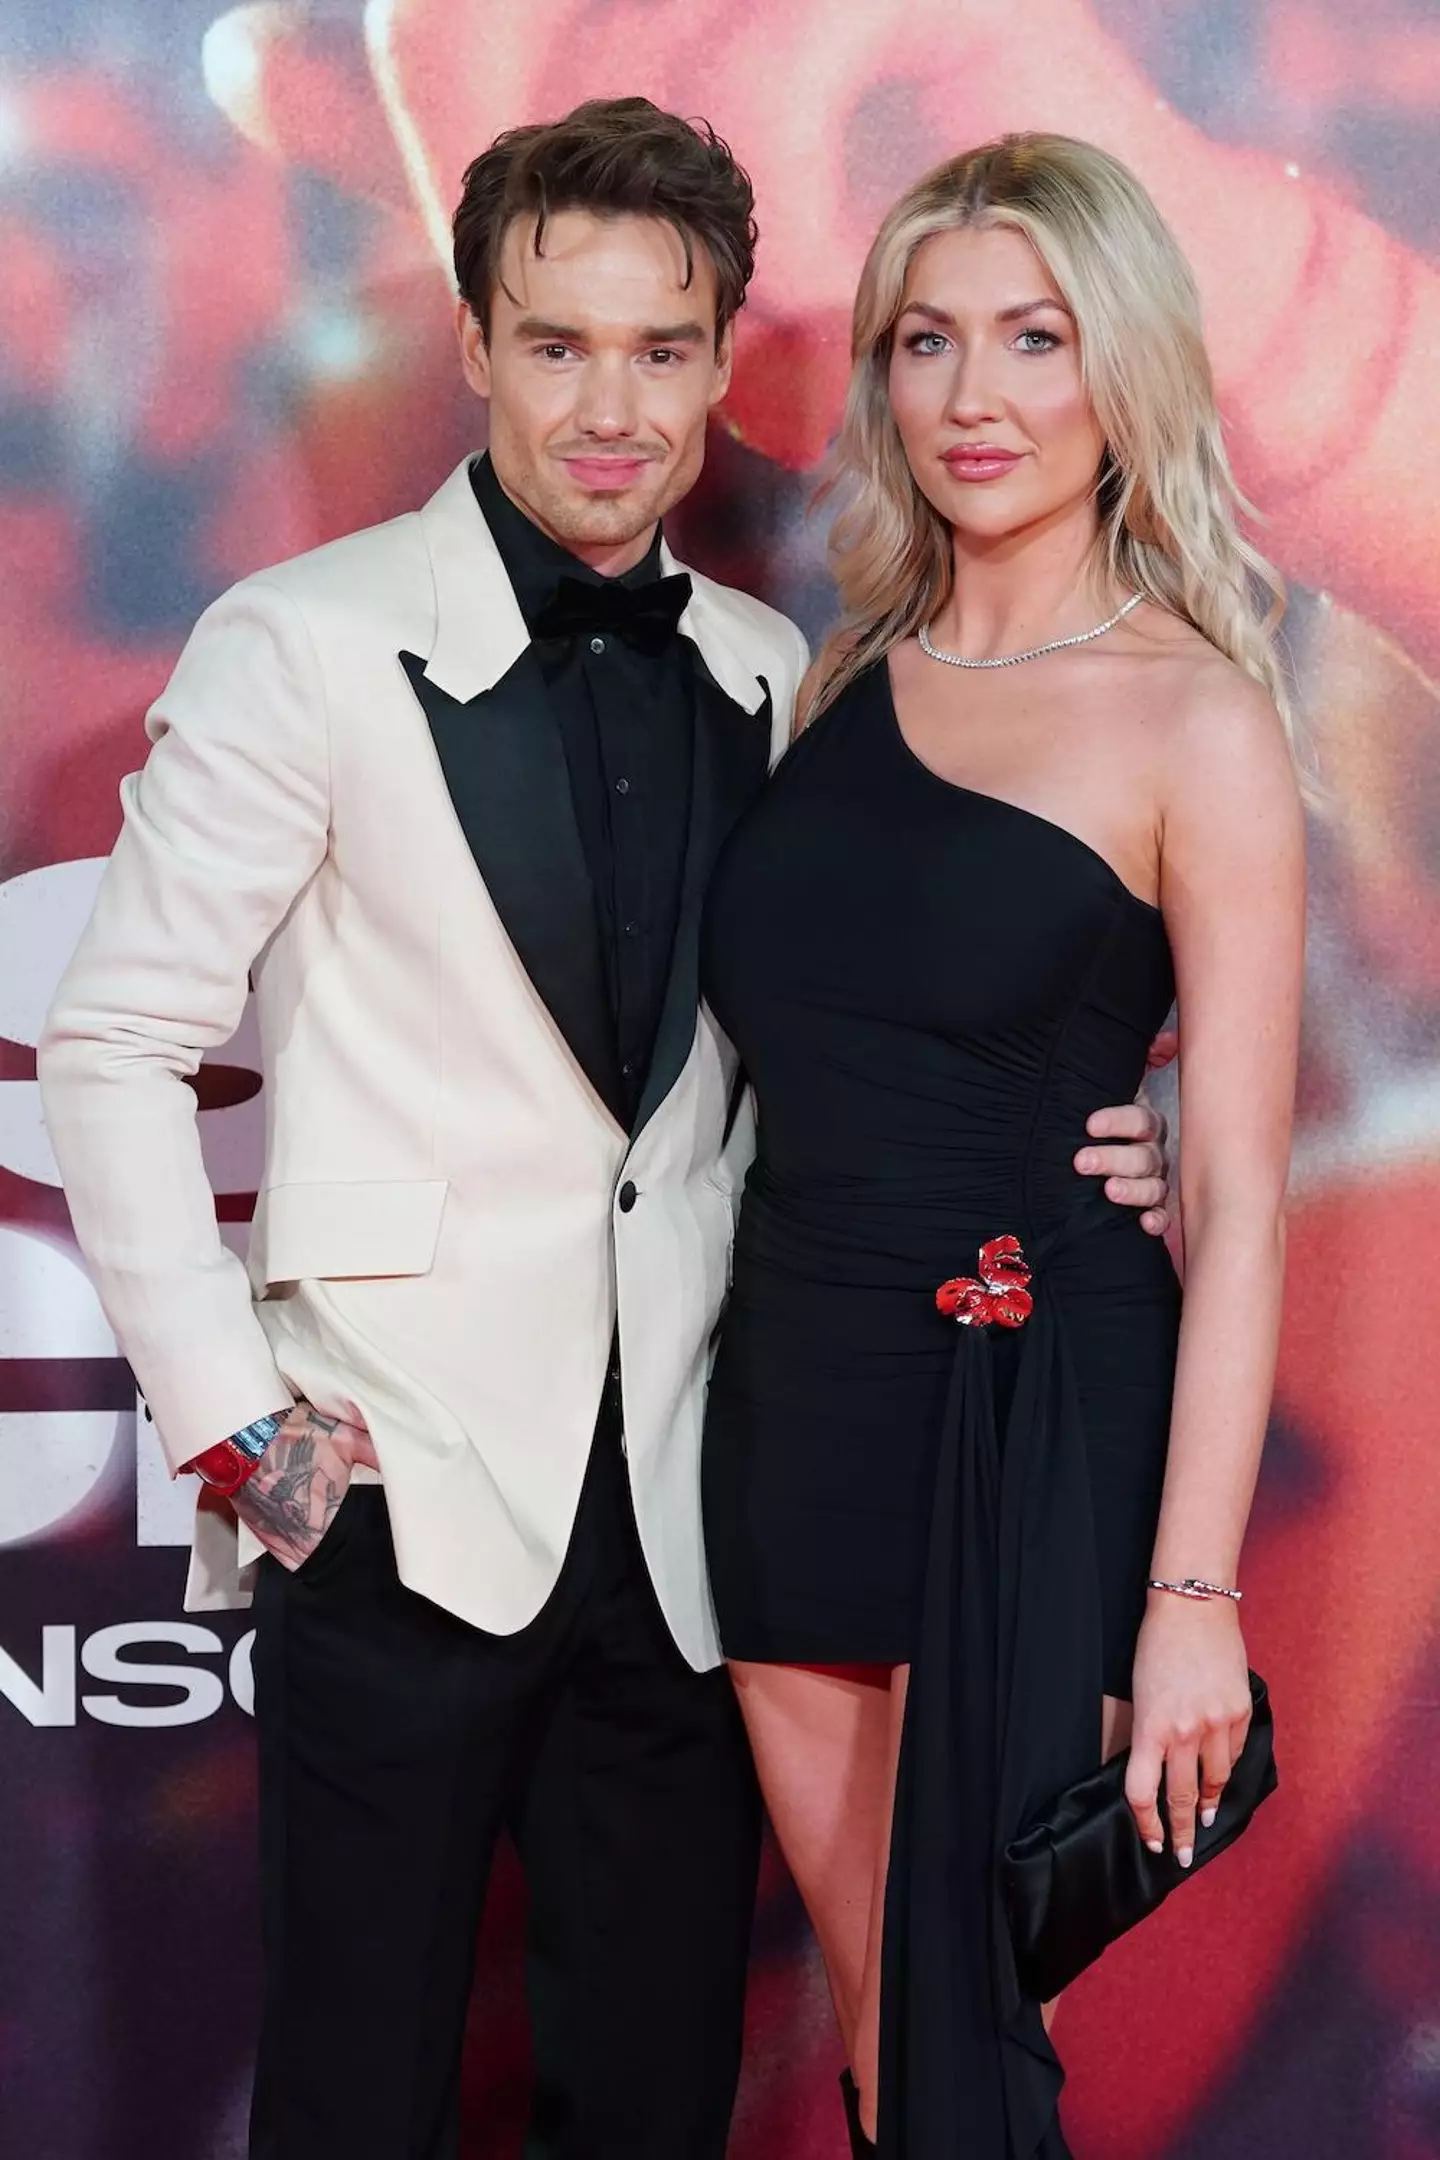 The fans heaped the praise on Liam Payne and Kate Cassidy.